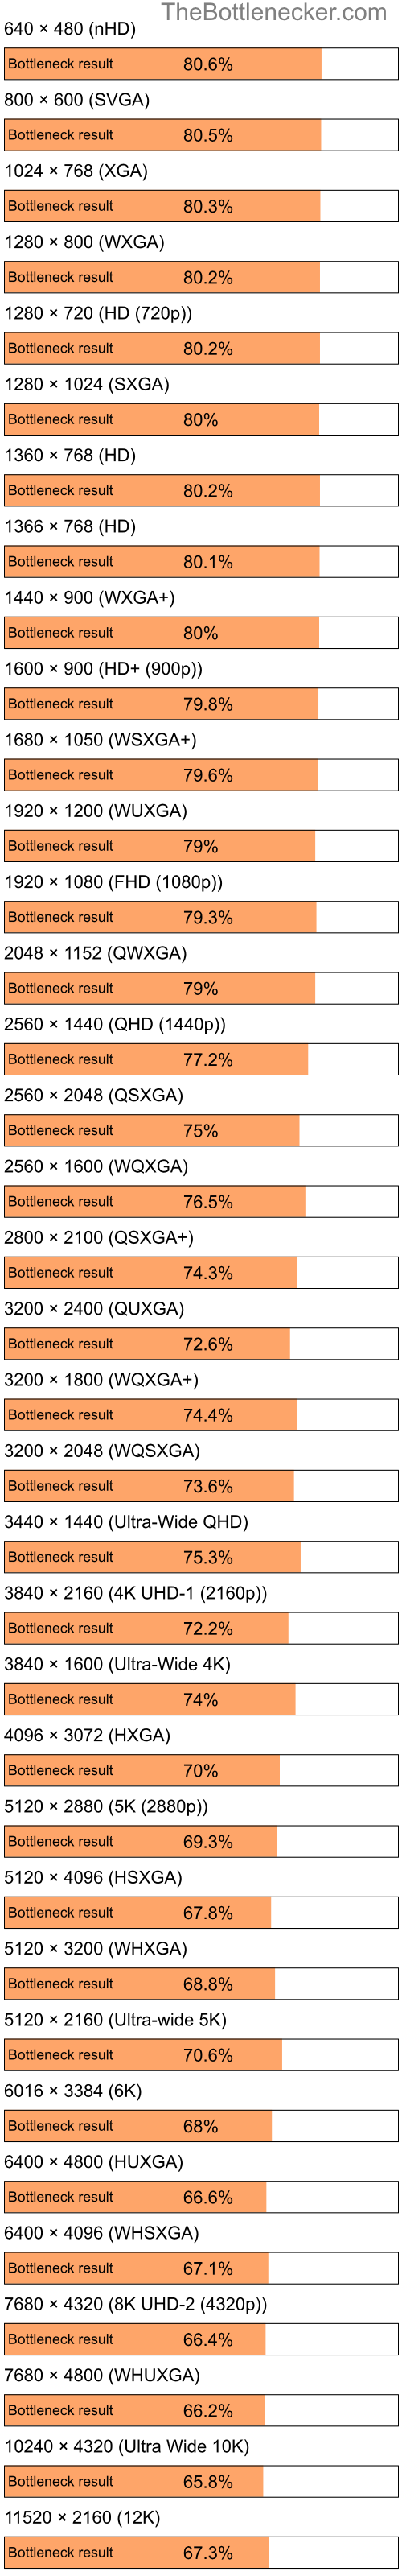 Bottleneck results by resolution for Intel Pentium 4 and NVIDIA GeForce GTX 1080 in Graphic Card Intense Tasks